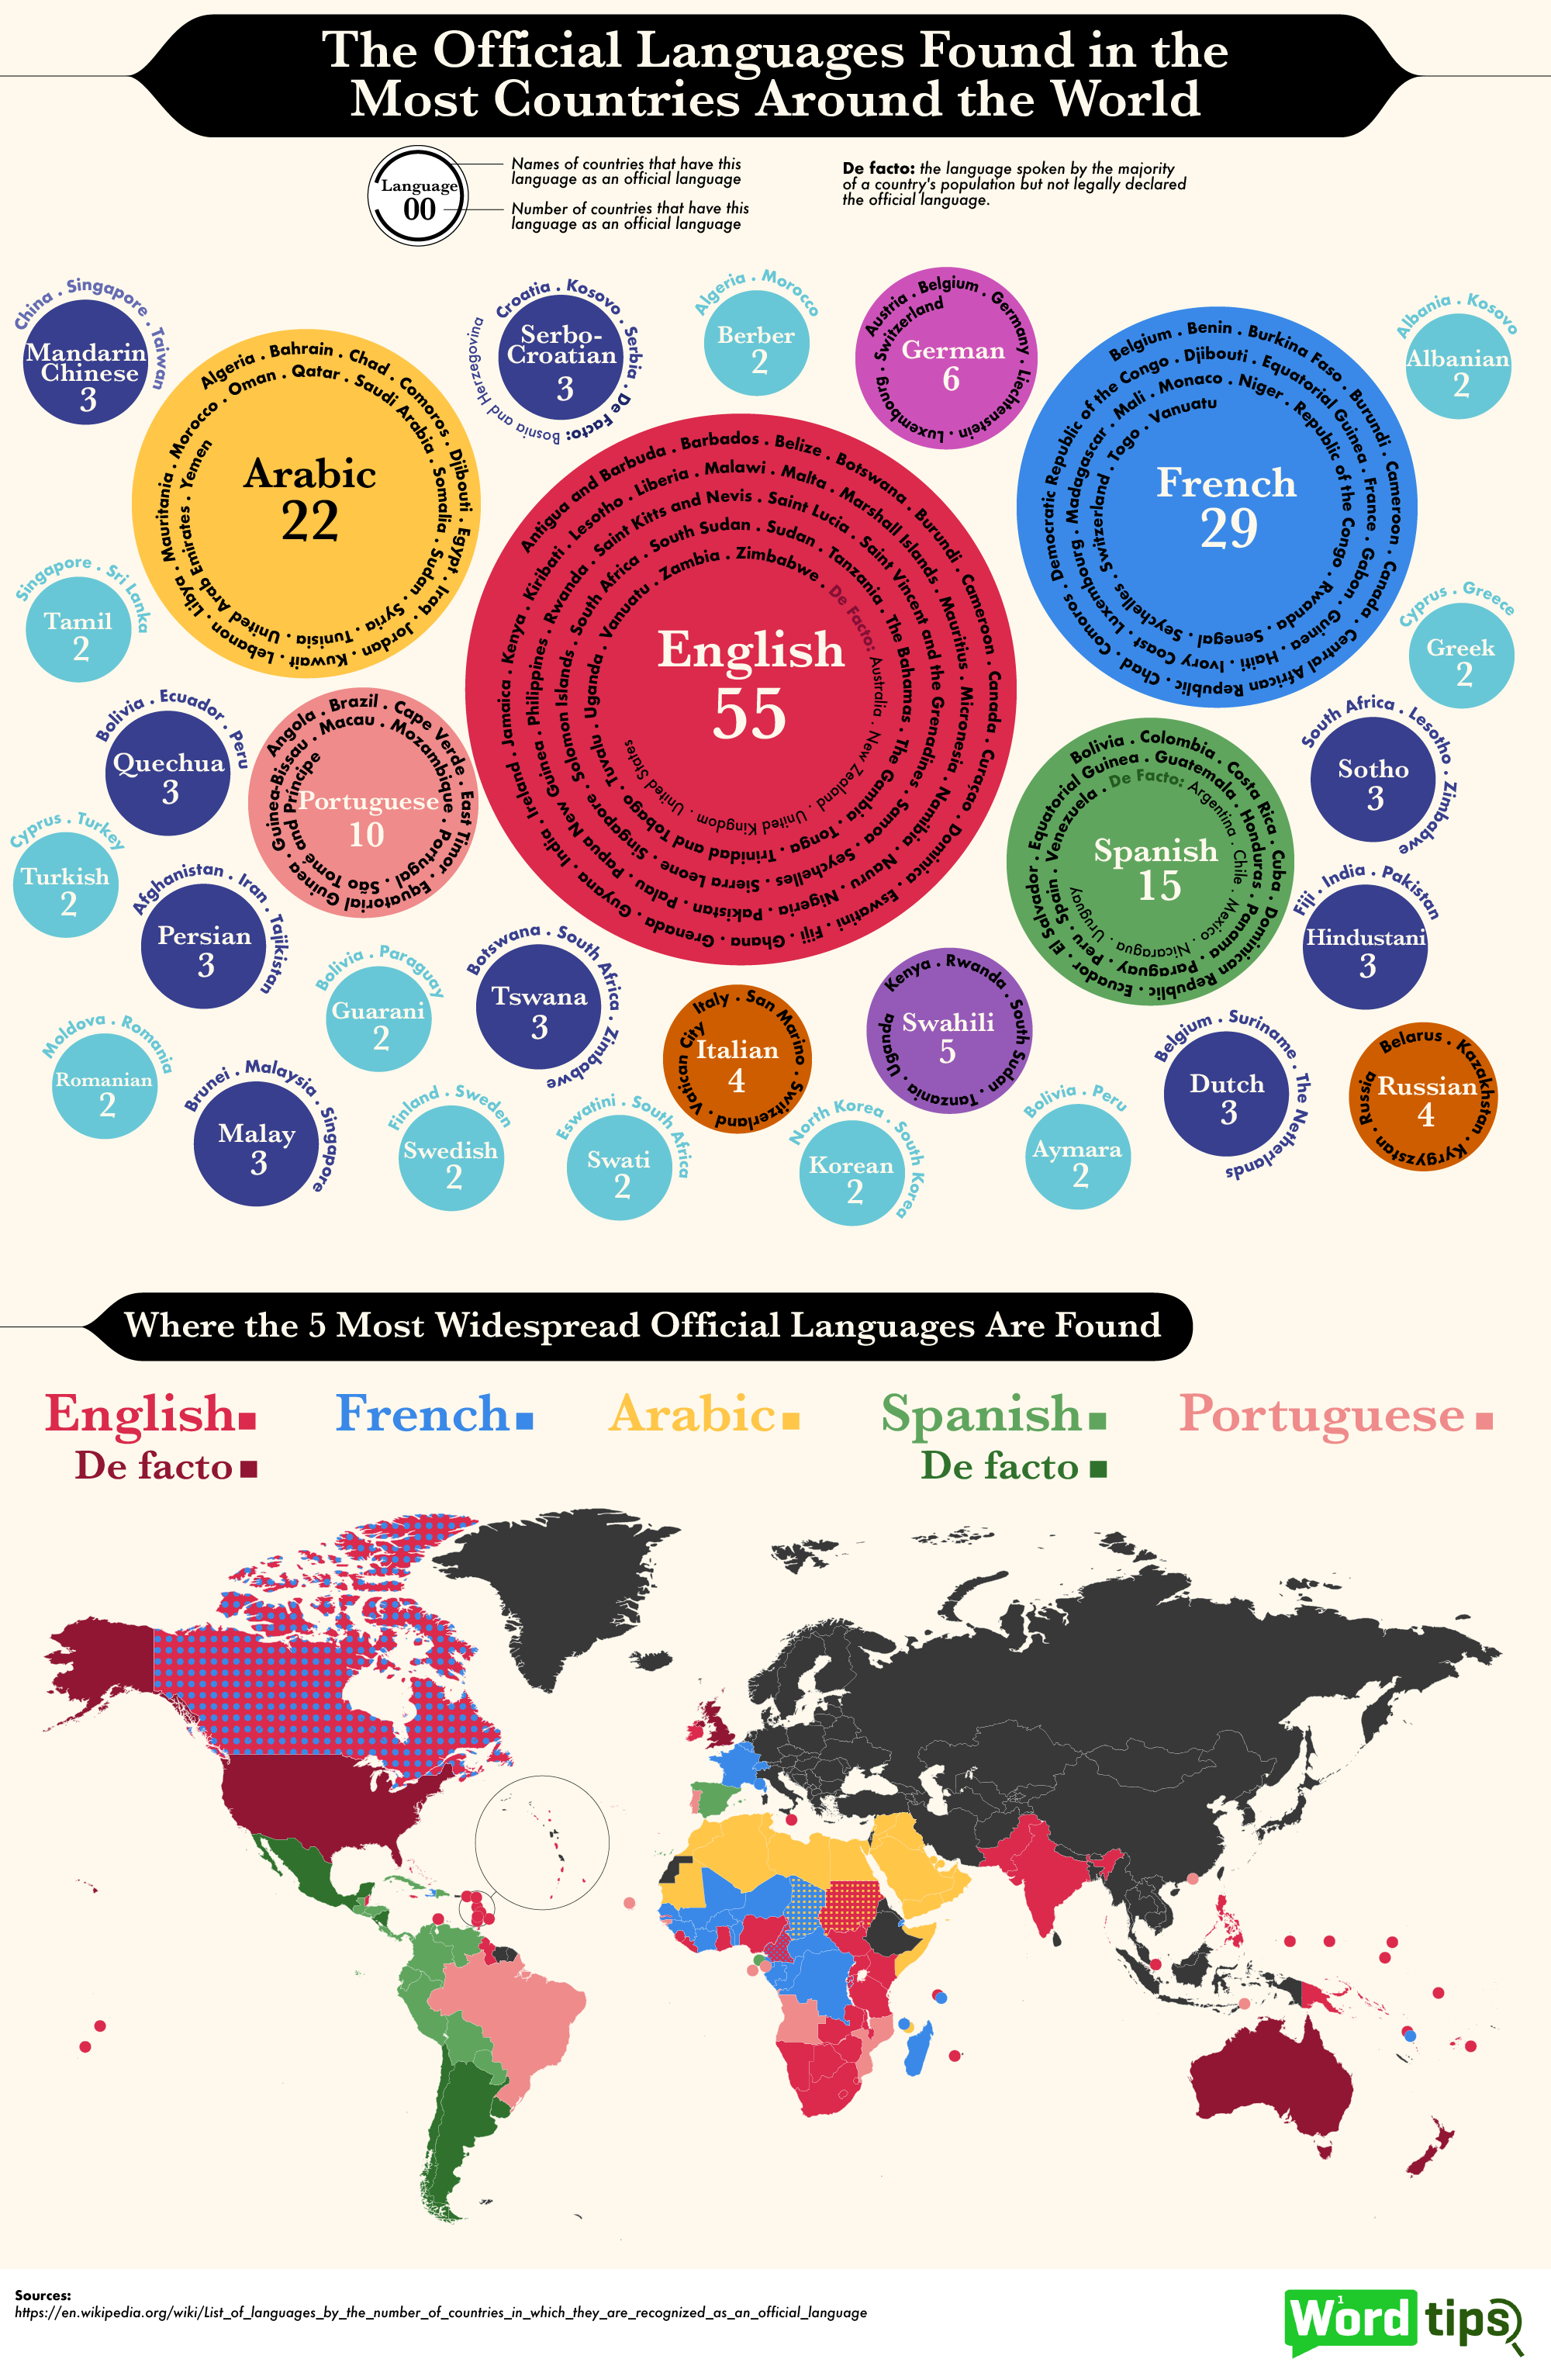 Which Languages Are the Official Language of the Most Countries